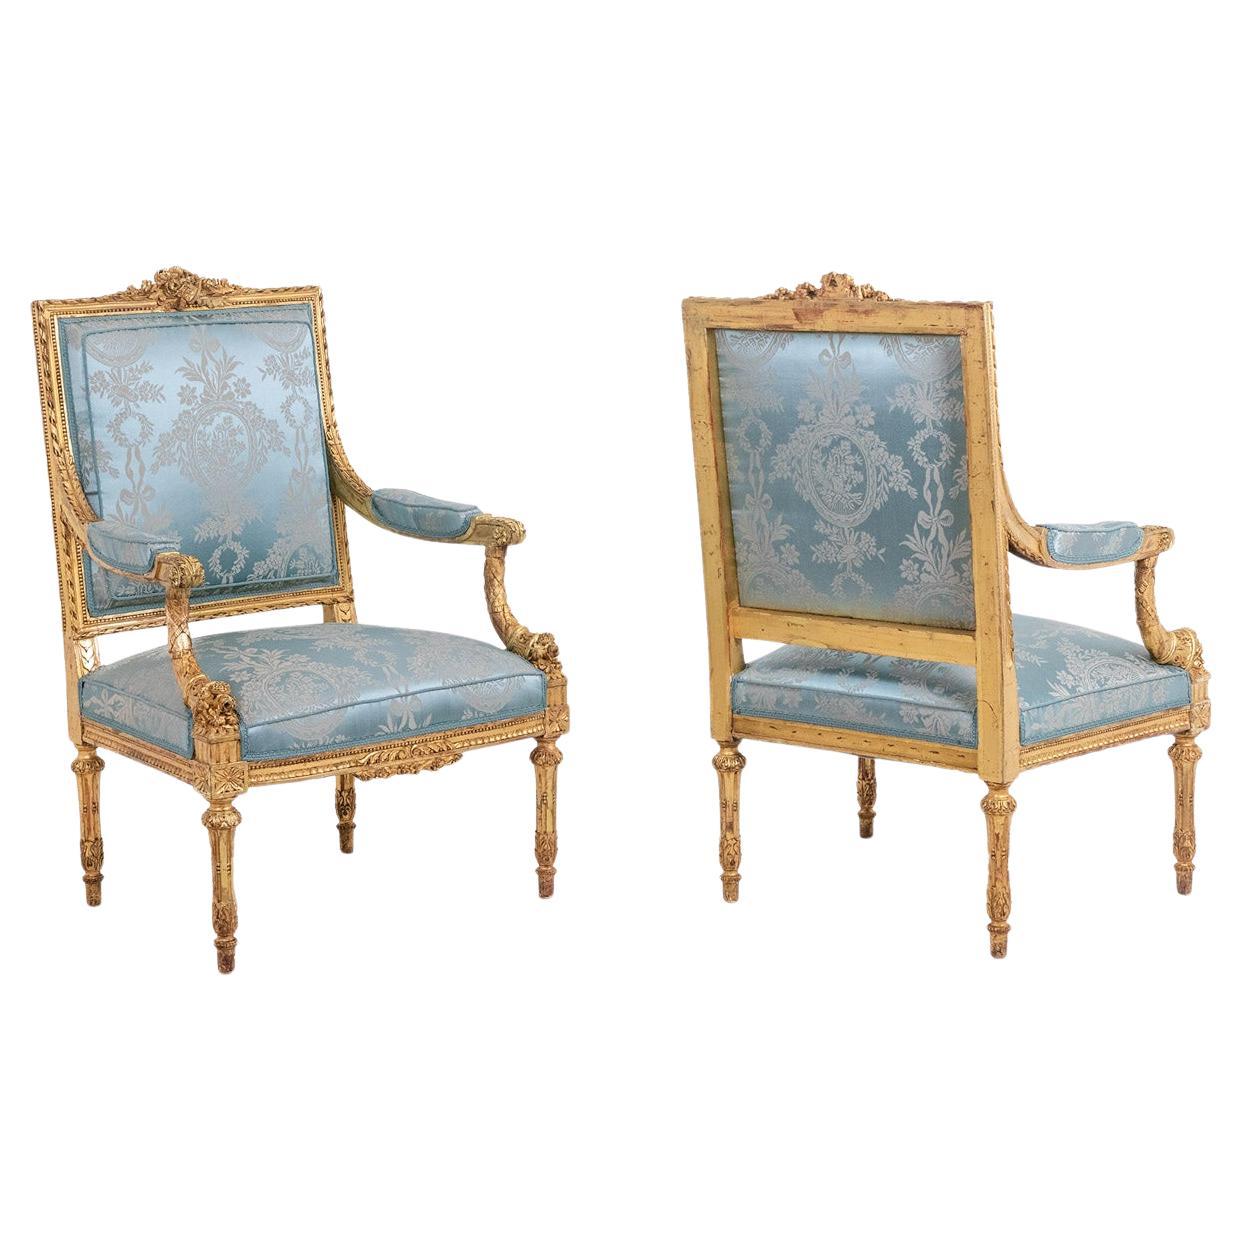 Pair of Louis XVI style armchairs in gilded and carved wood. Circa 1880.